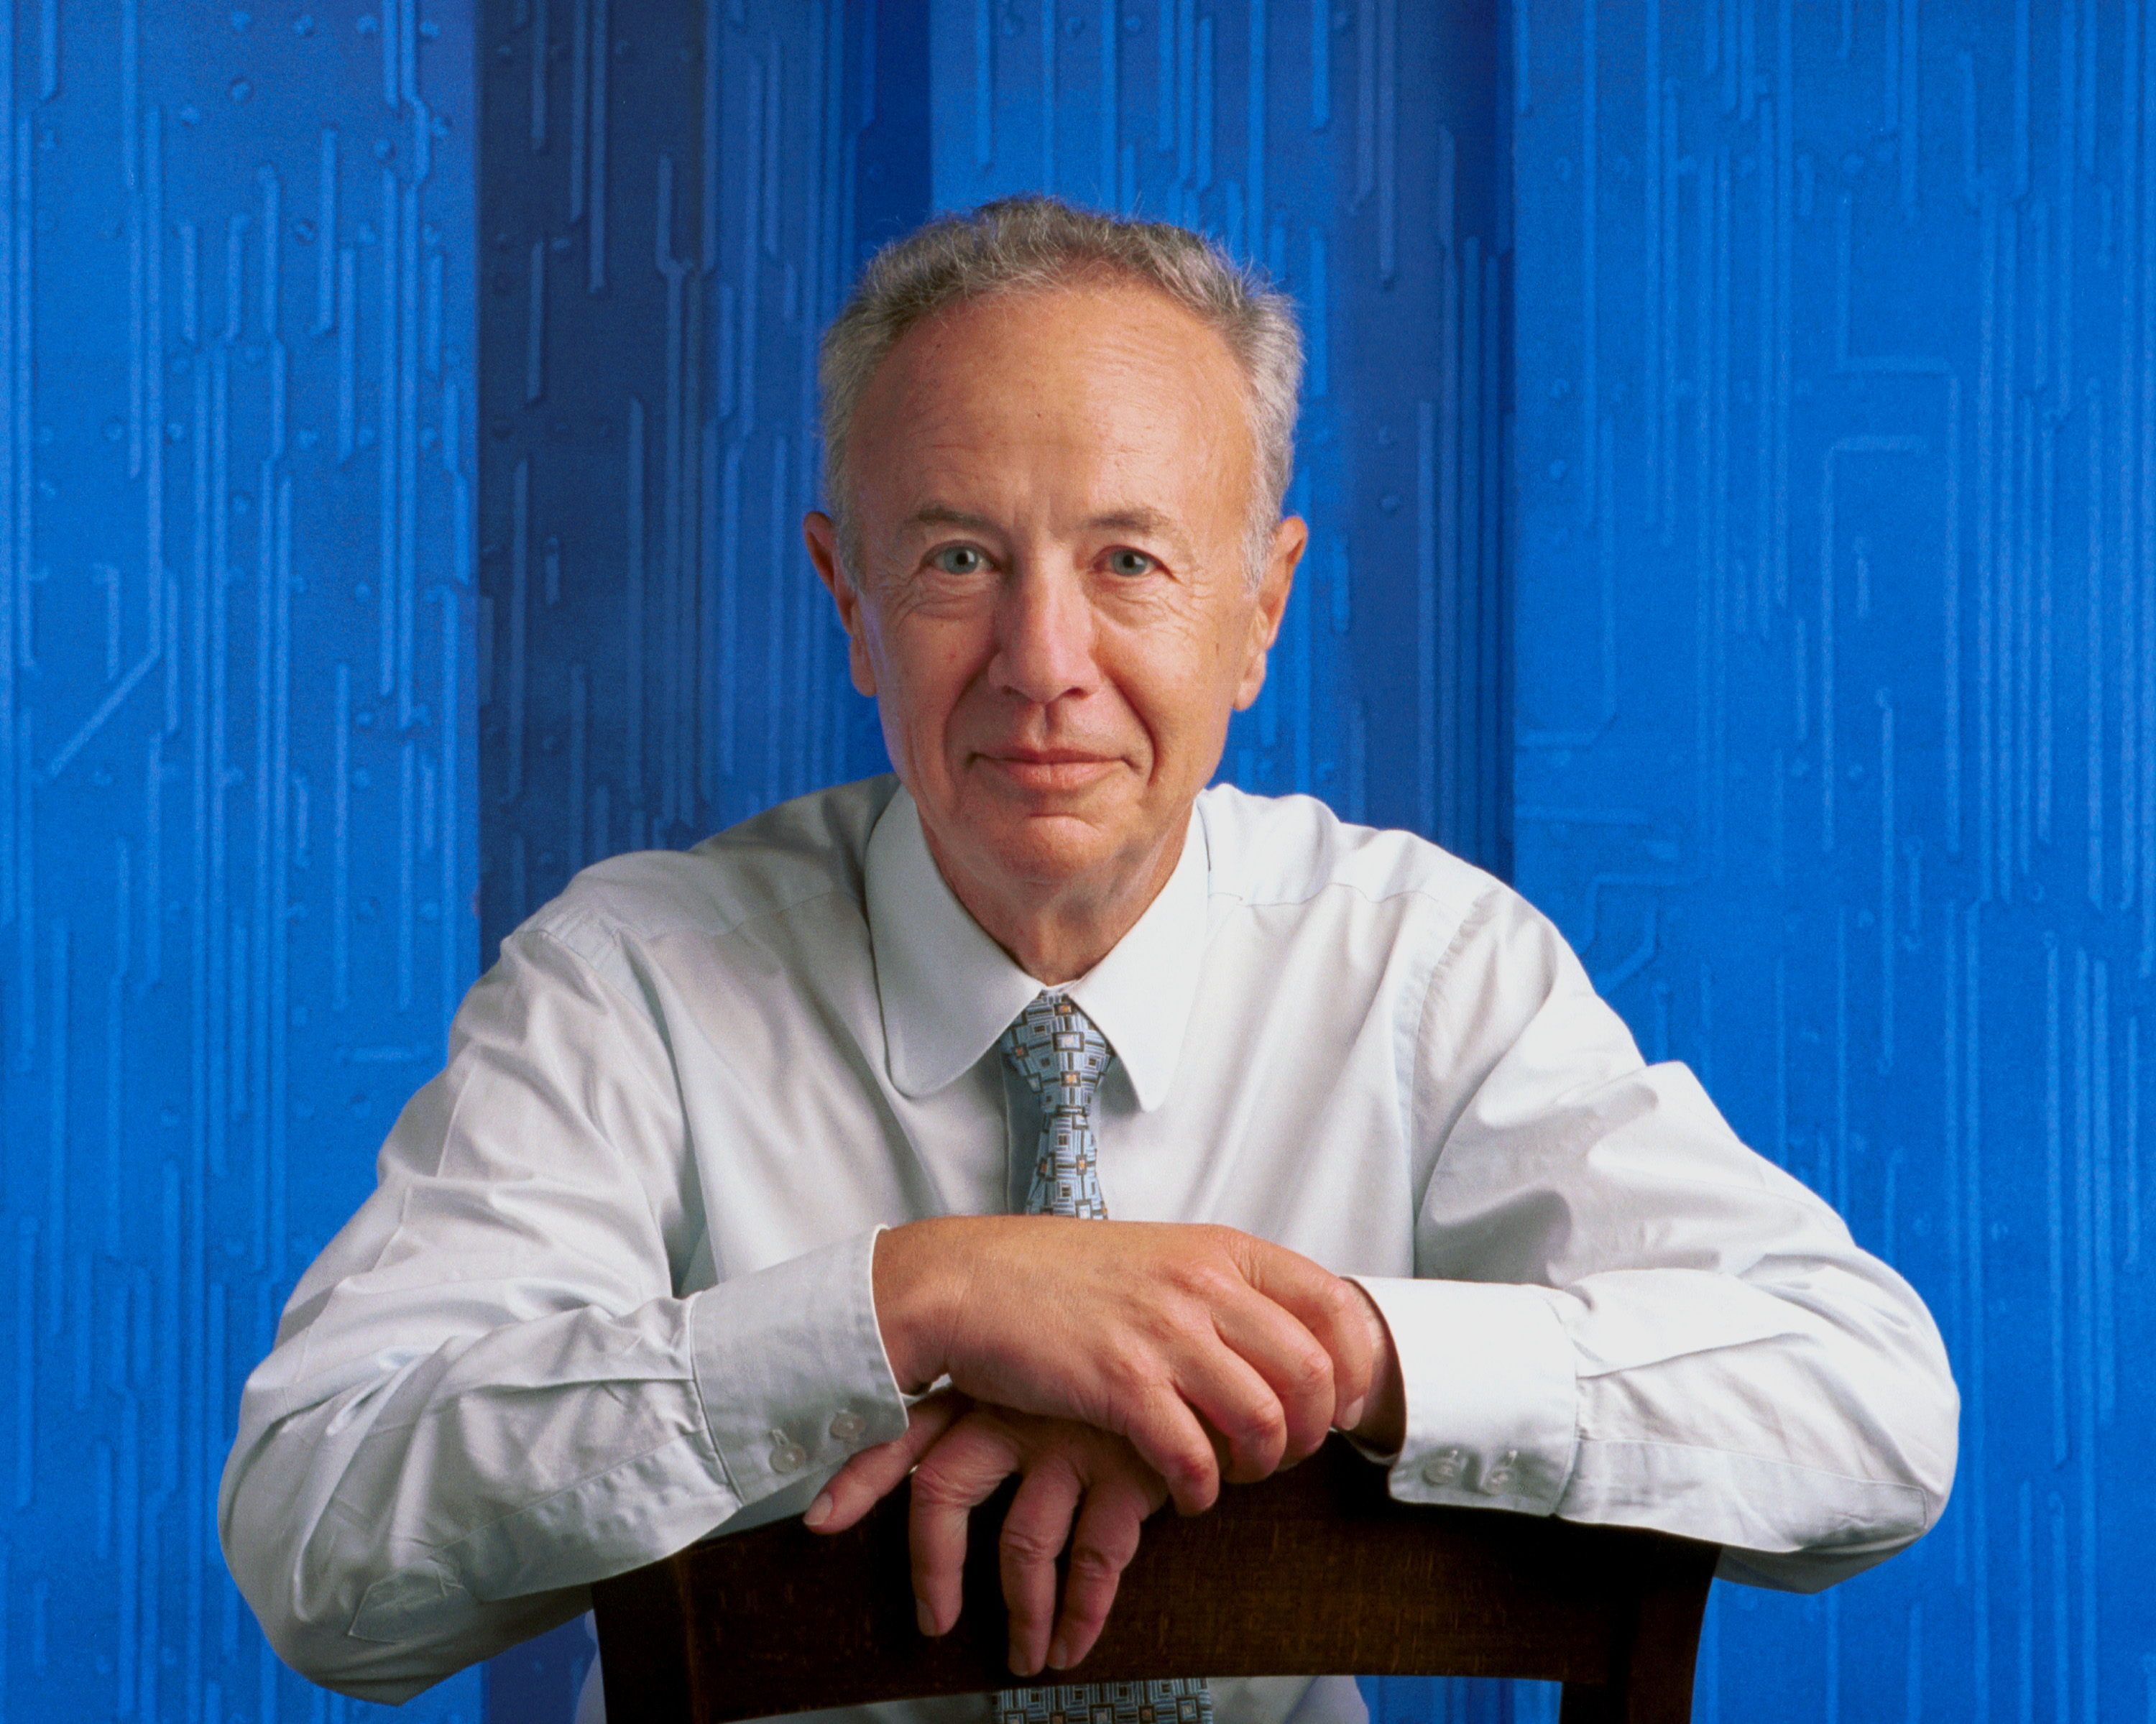 Ceo Of The Intel Corporation Andy Grove Poses For A Portrait June, 2000 In Palo Alto, California. (Anne Knudsen—Getty Images)